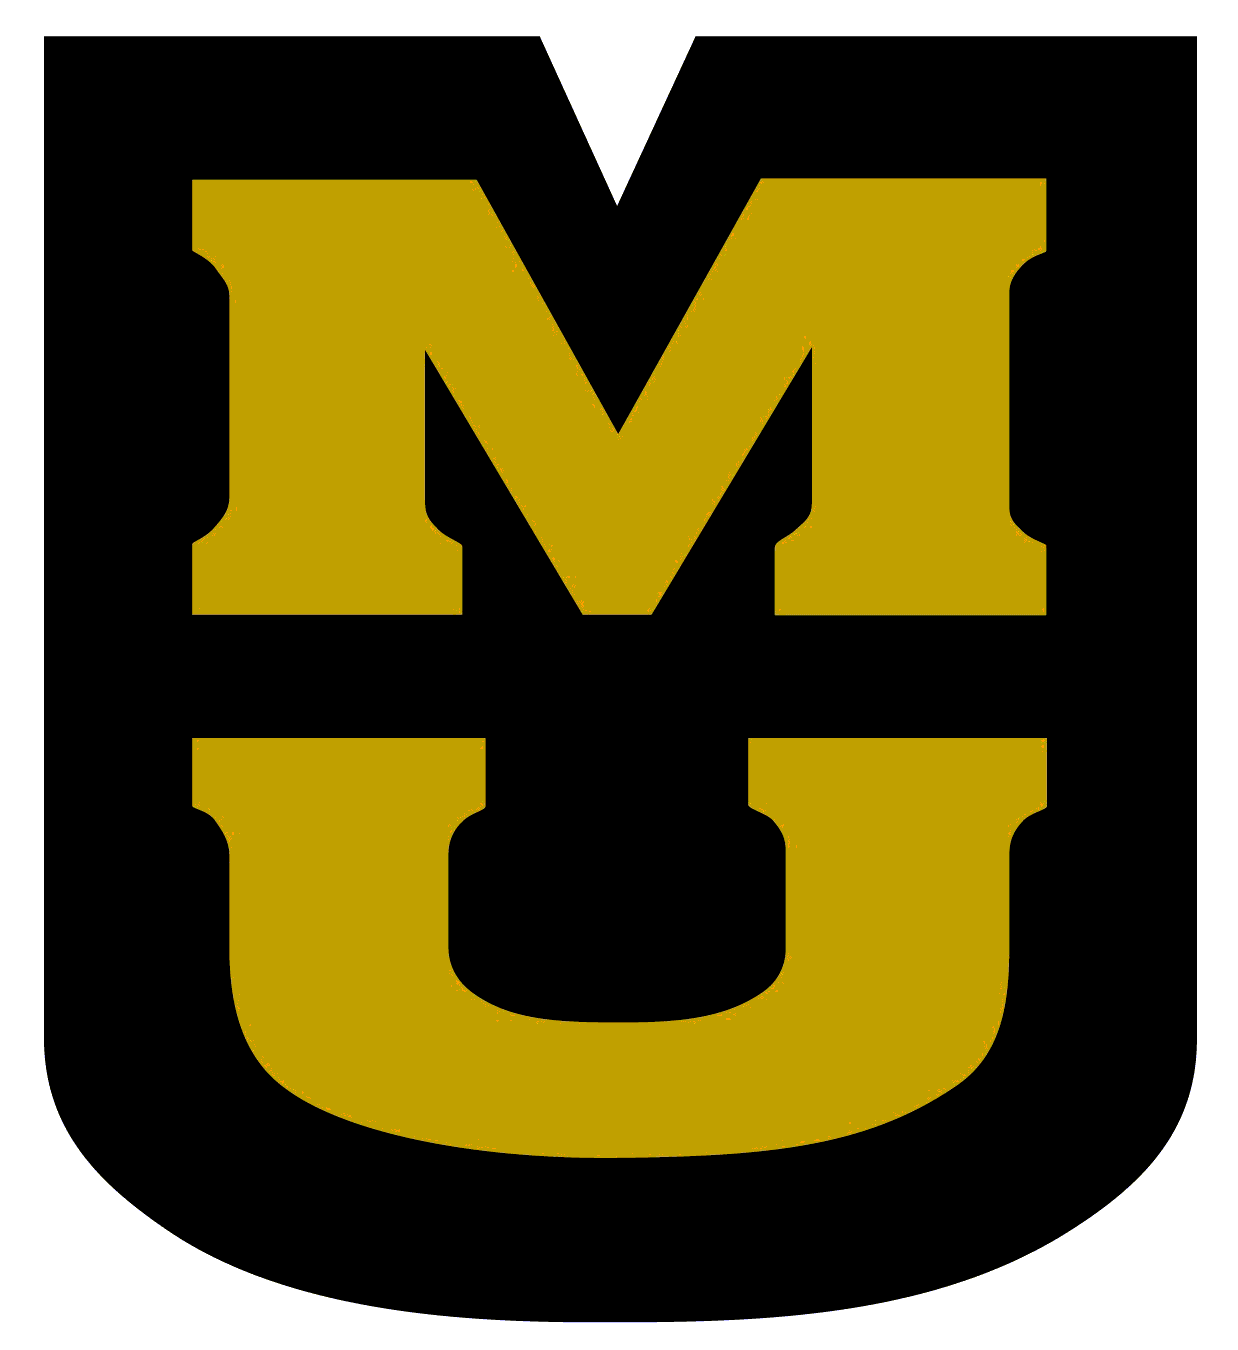 Nuclear Science and Engineering Institute, Mizzou